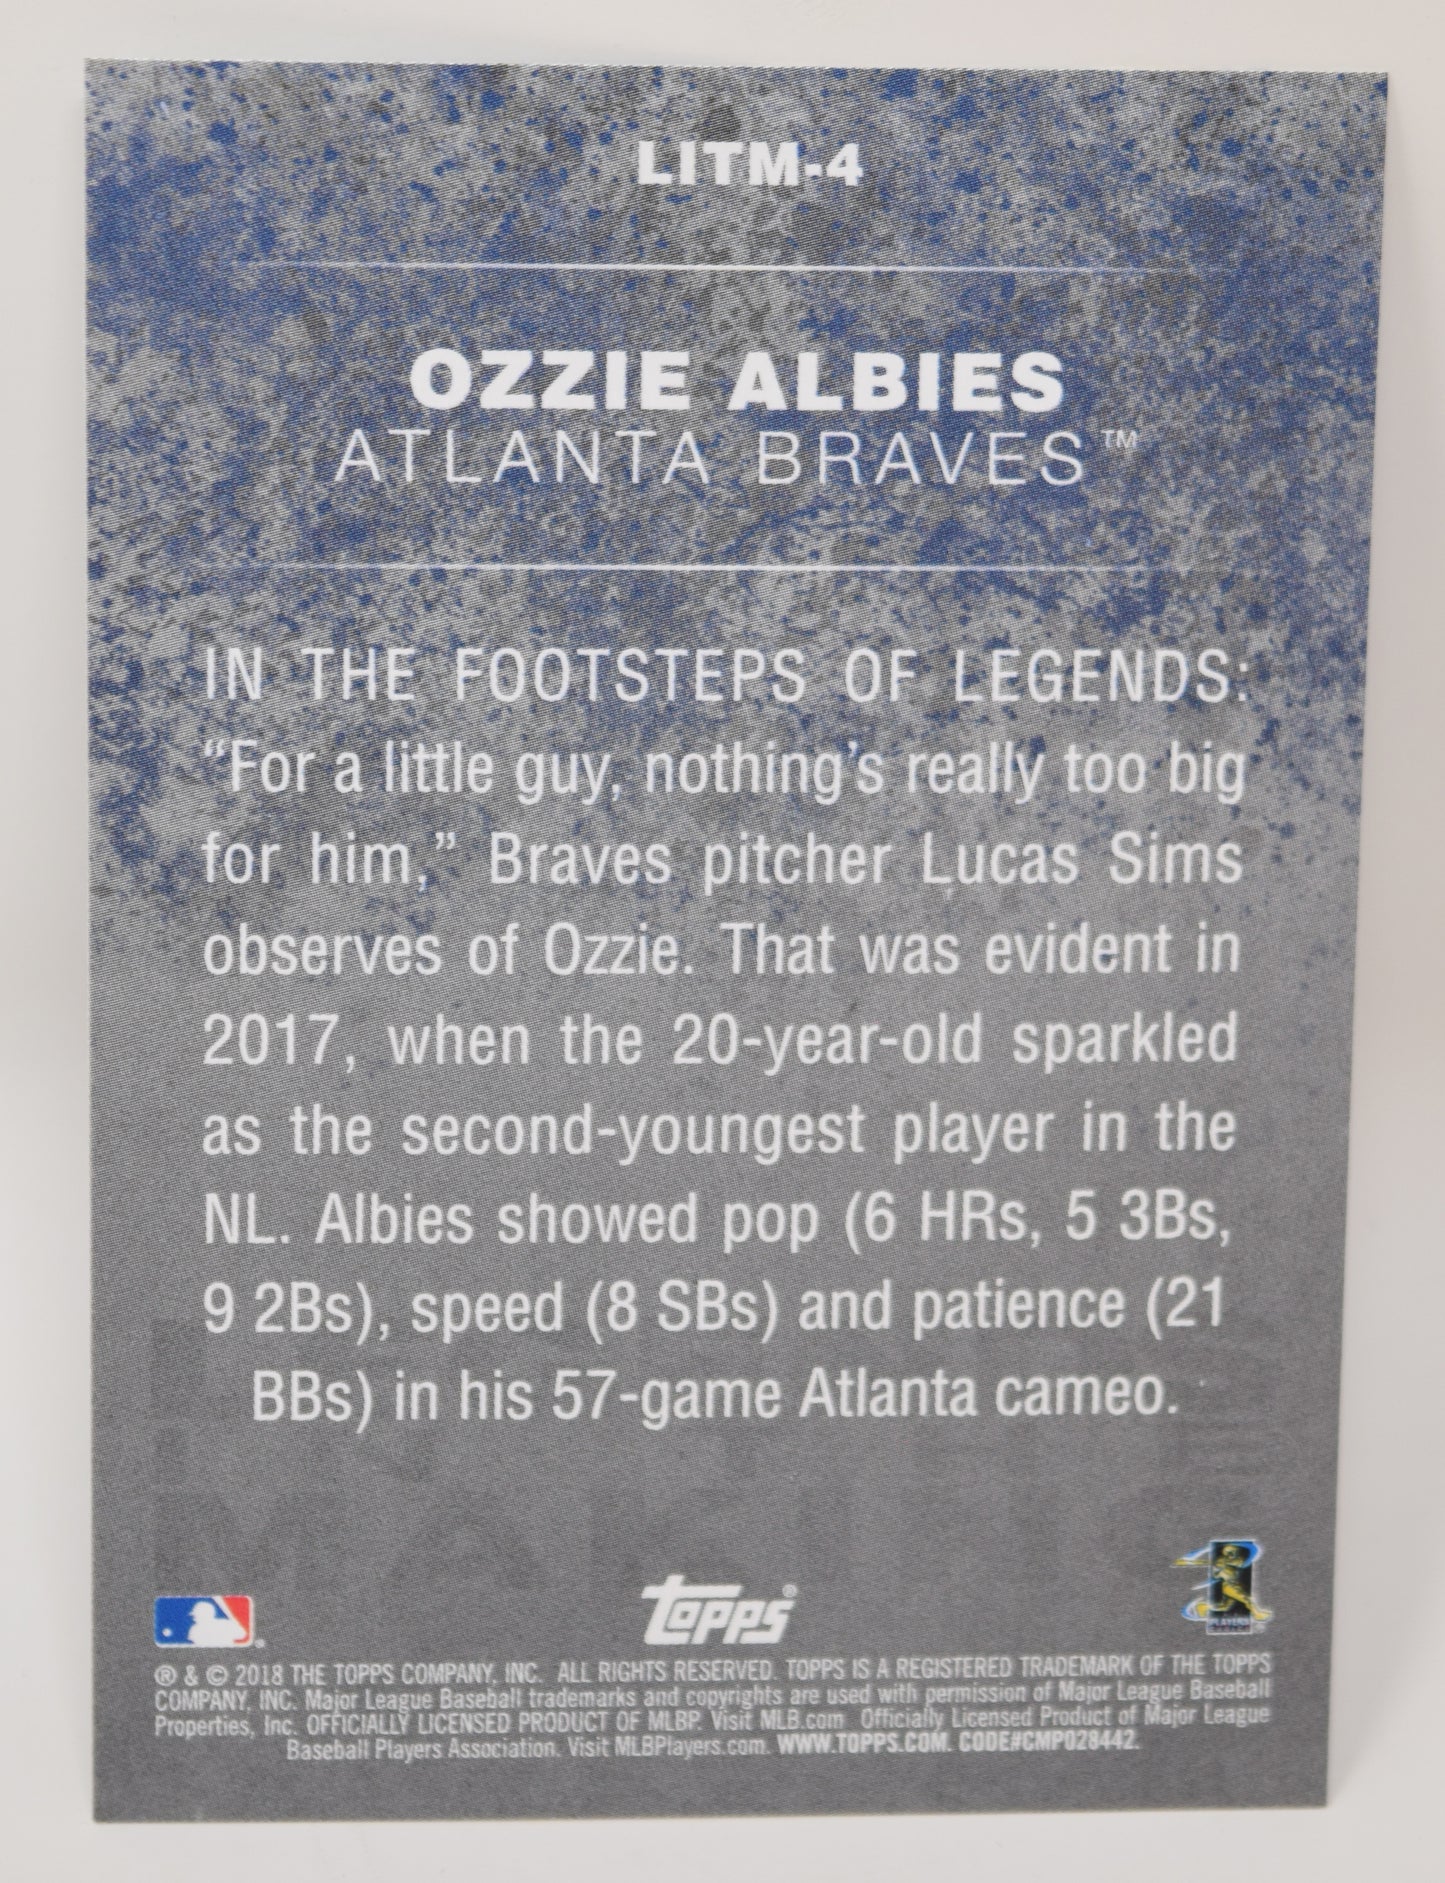 Ozzie Albies Topps 2018 Baseball Legend In Making RC Rookie Card Braves LITM-4